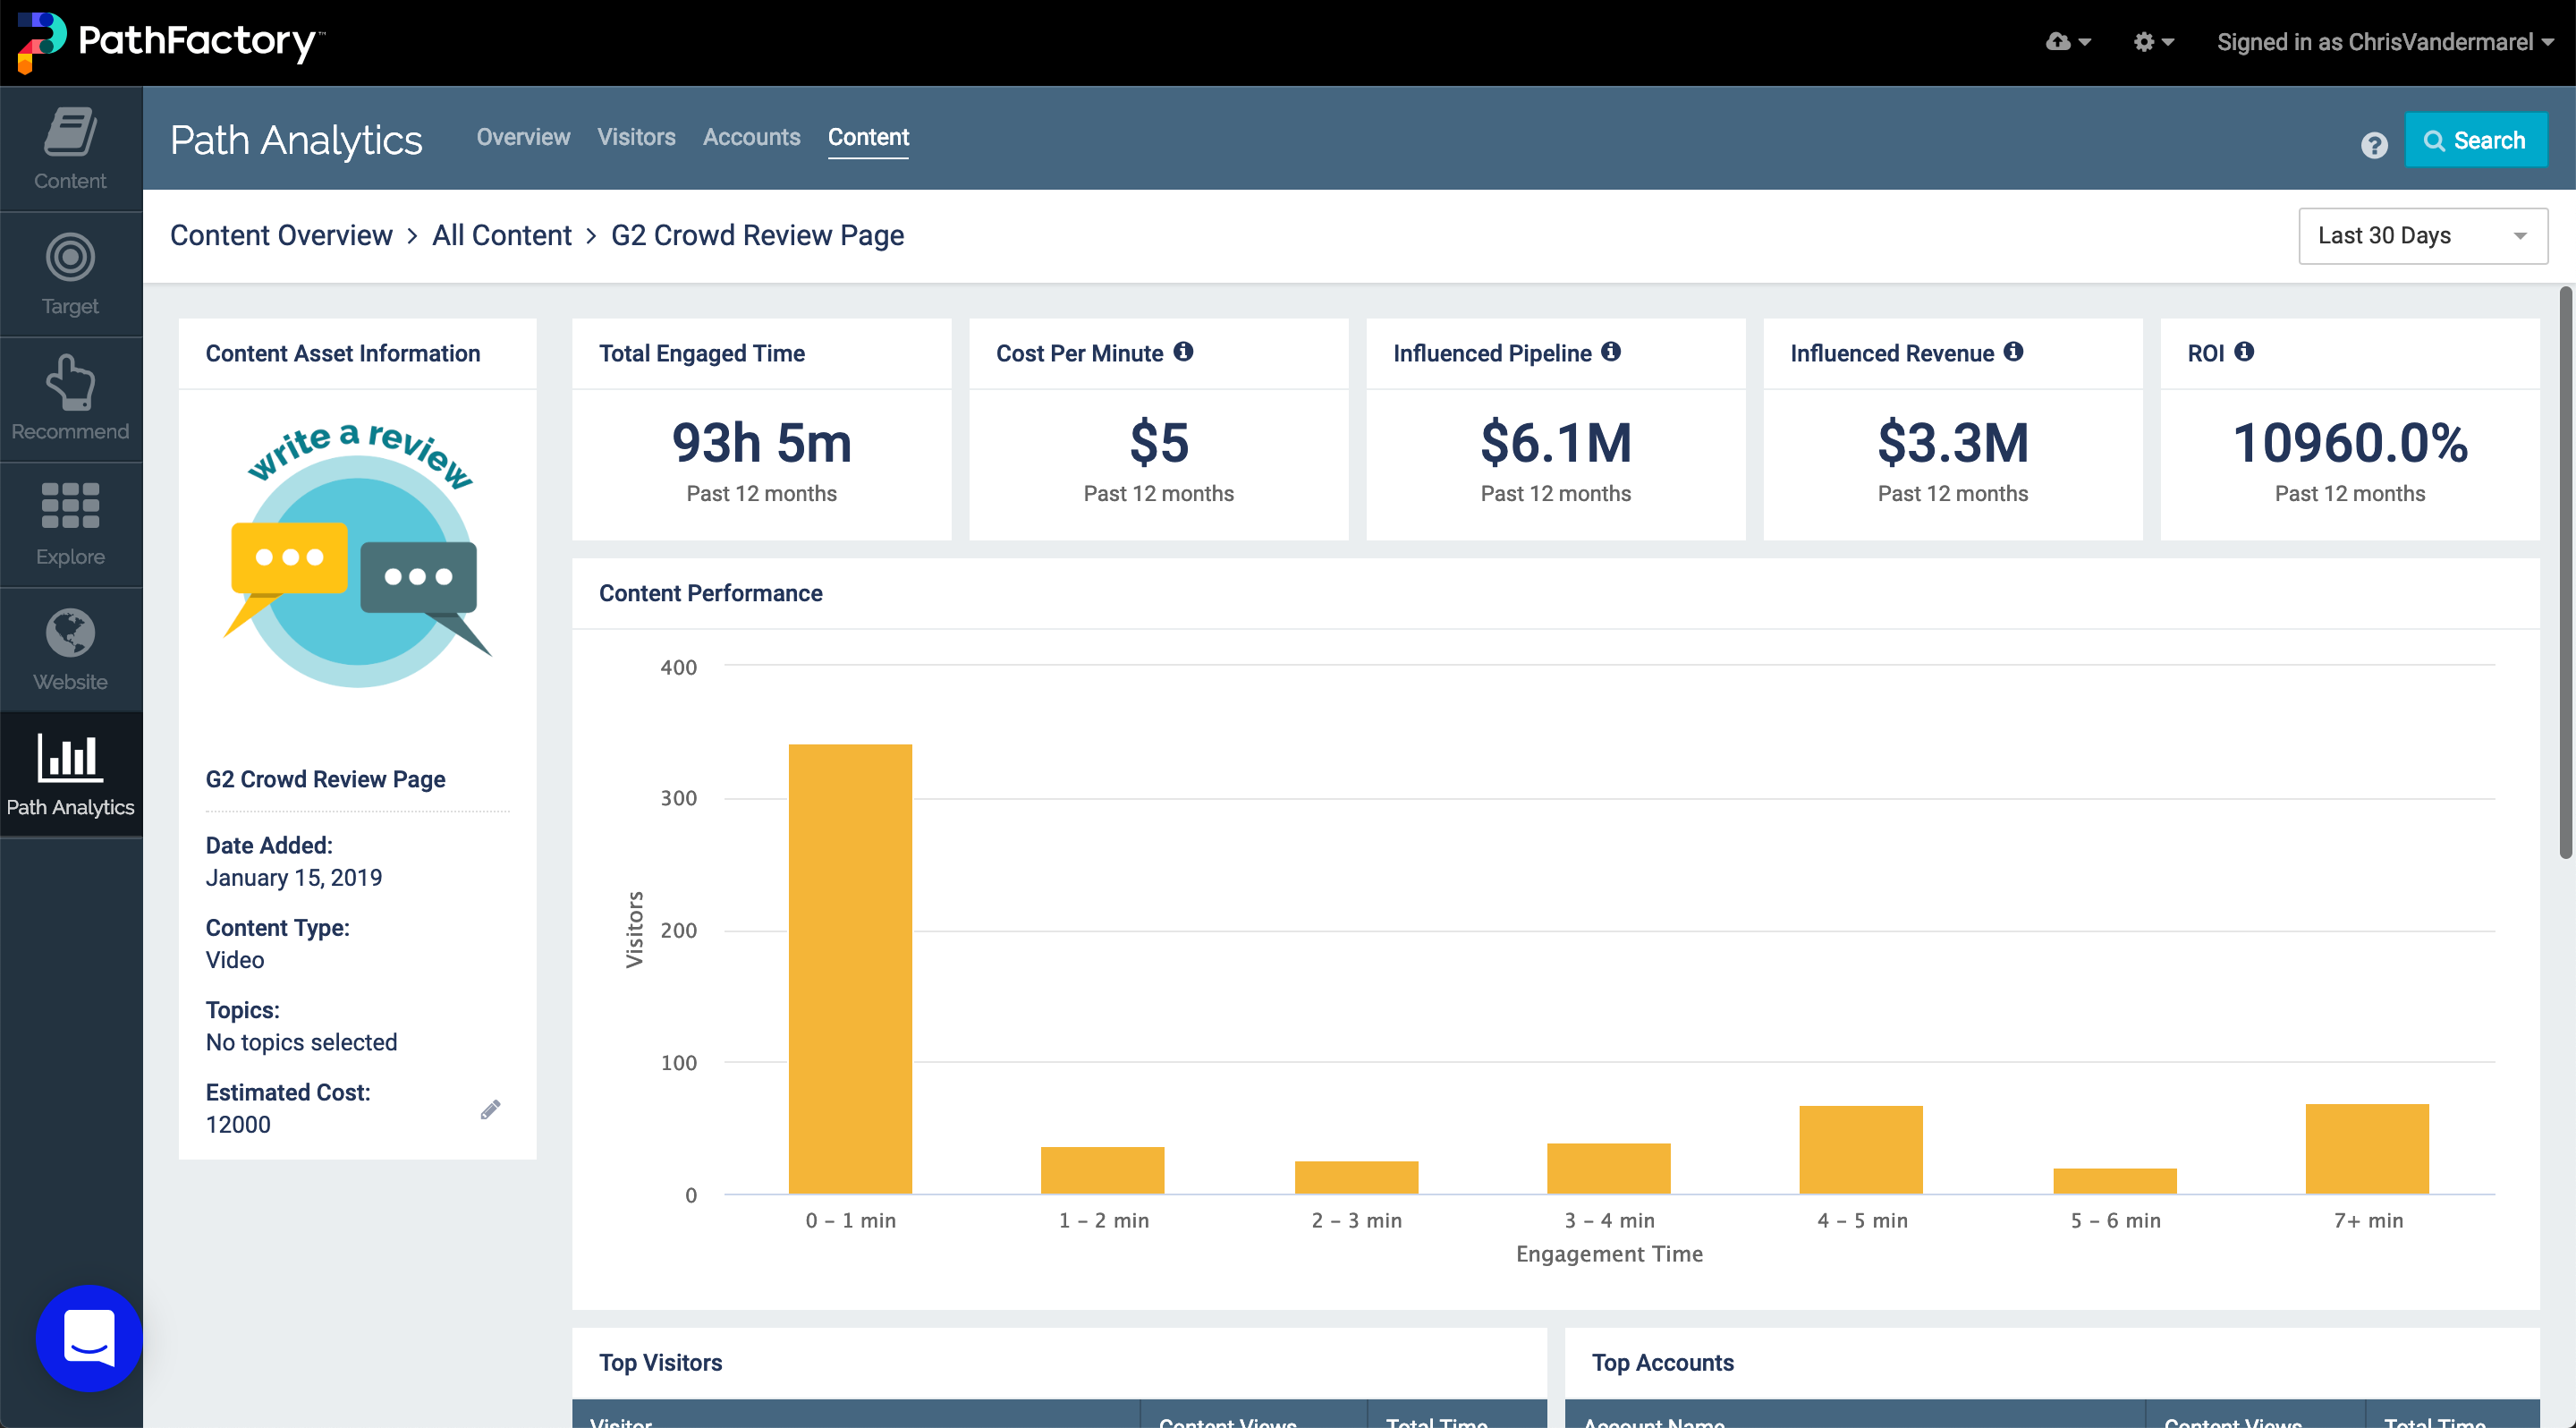 ScreenShot of the PathFactory Platform, Path Analytics. This image shows a content performance overview of a G2 Ground Review Page, including Total Engagement Time, Cost Per Minute, Influenced Pipeline, Influenced Revenue, ROI and a graph showing content performance